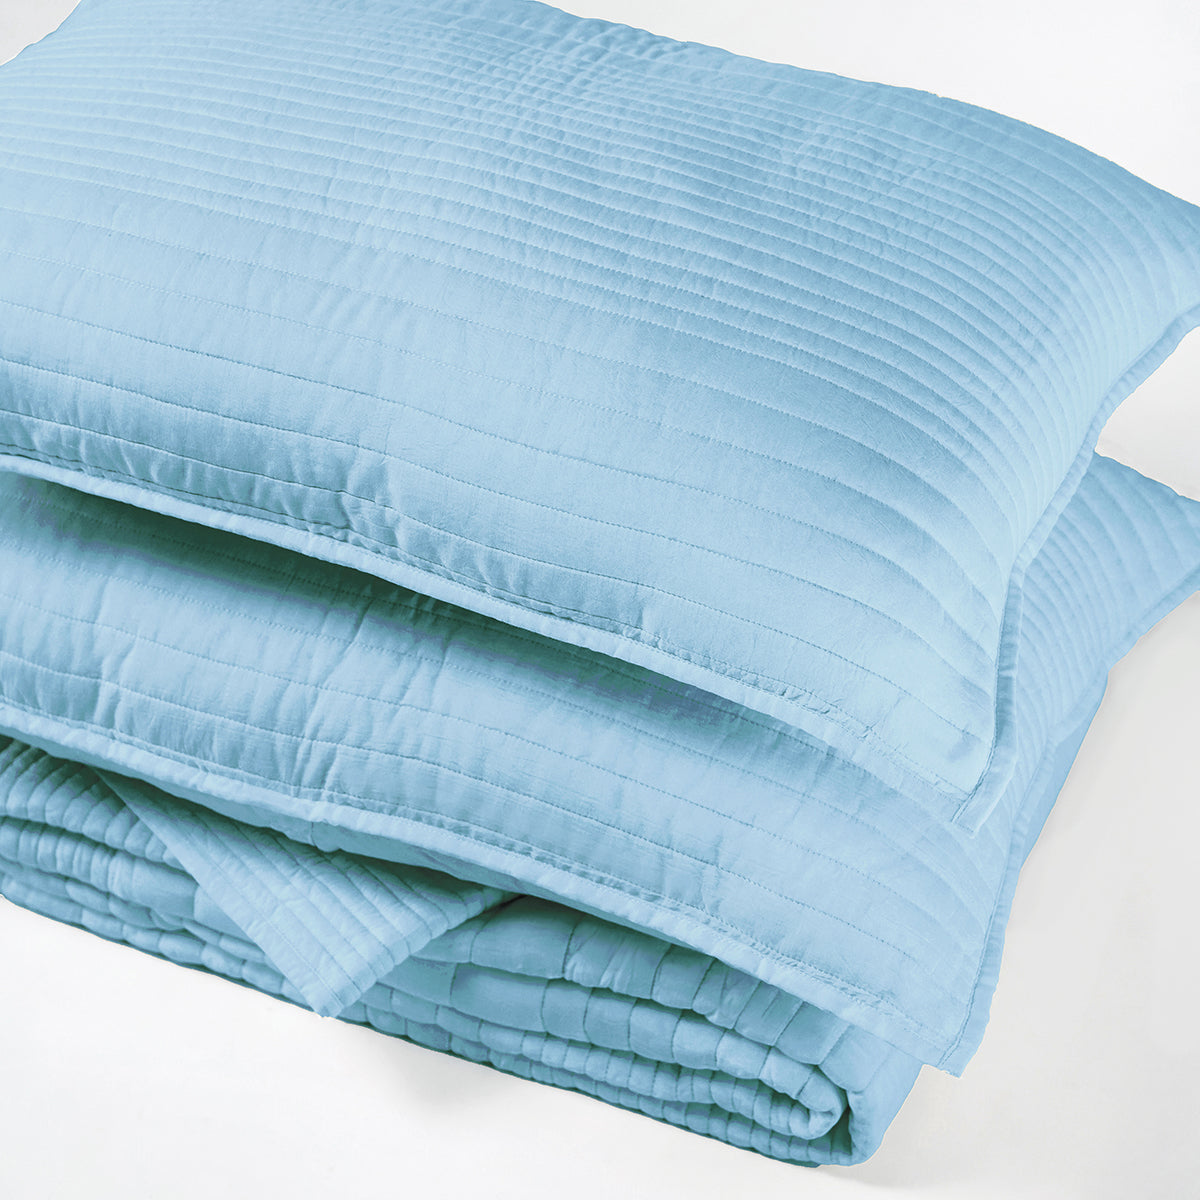 SKY BLUE luxury 300TC cotton satin Quilt with coordinated pillow cases, Sizes available